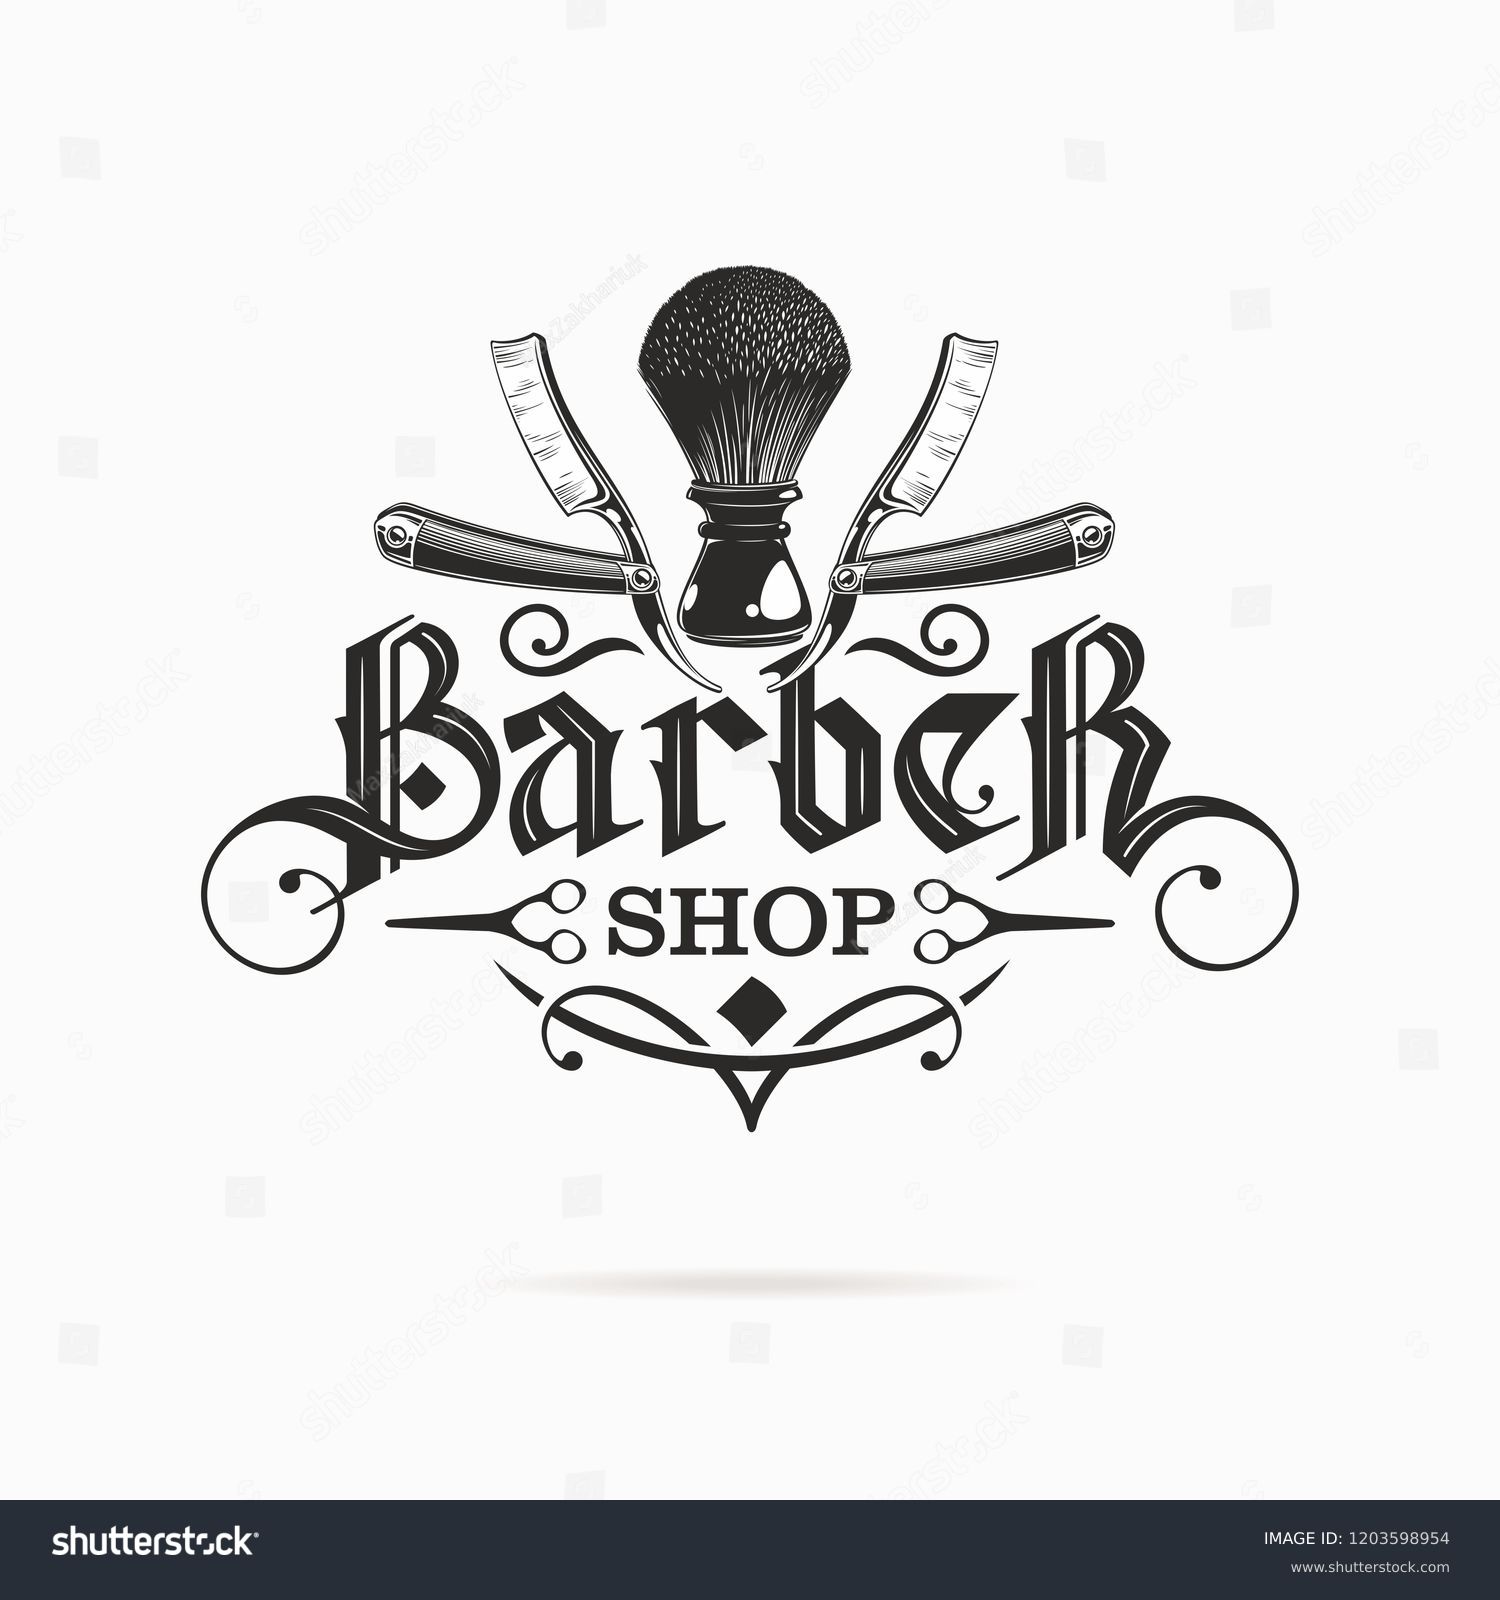 barber shop logo with gothic lettering #1203598954